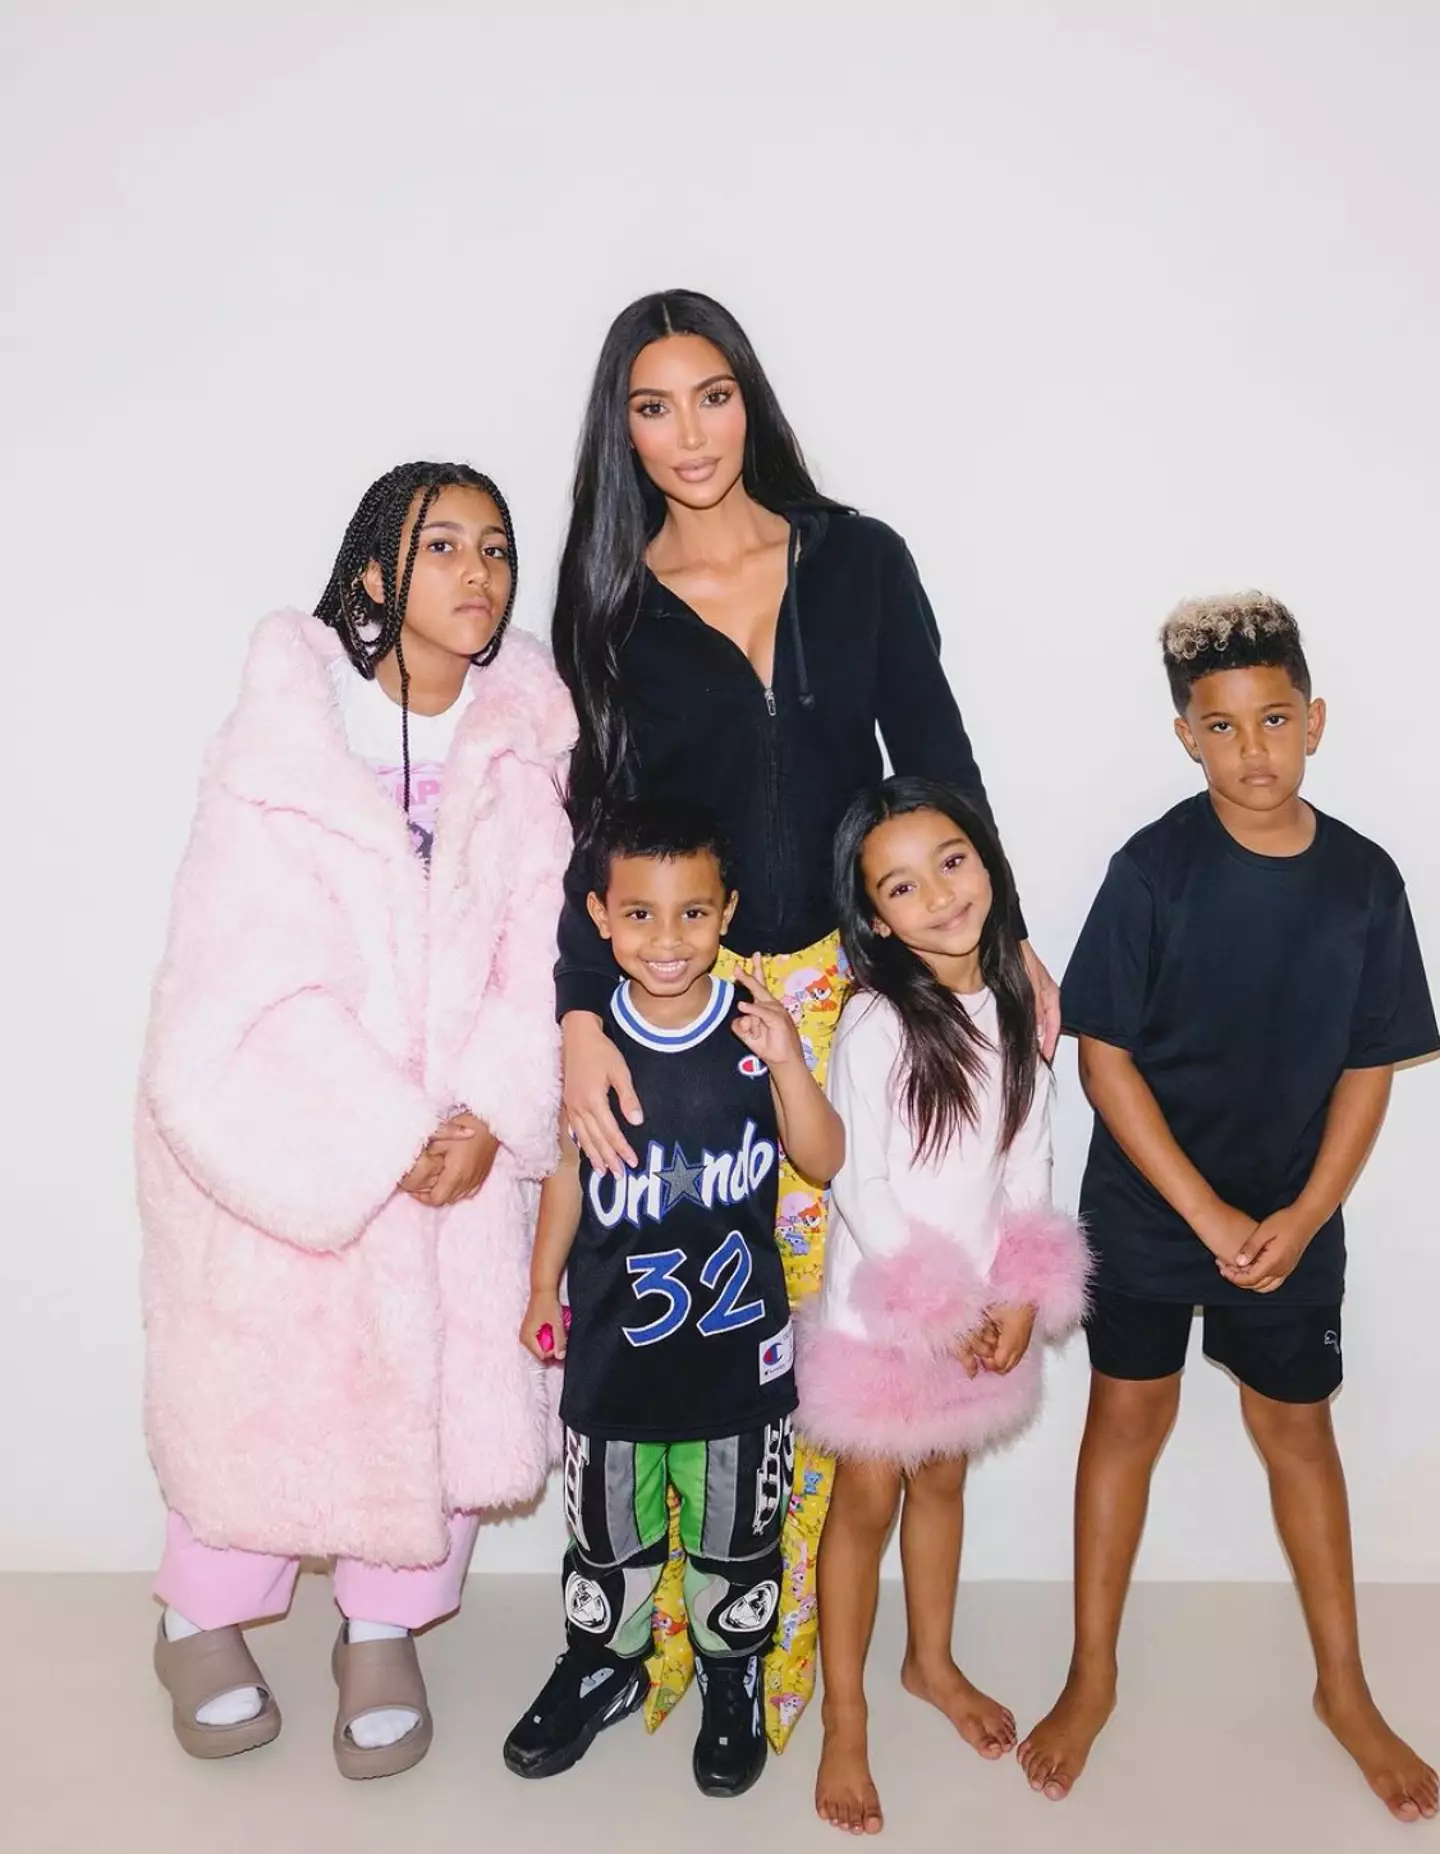 Kim and Kanye share four children together.